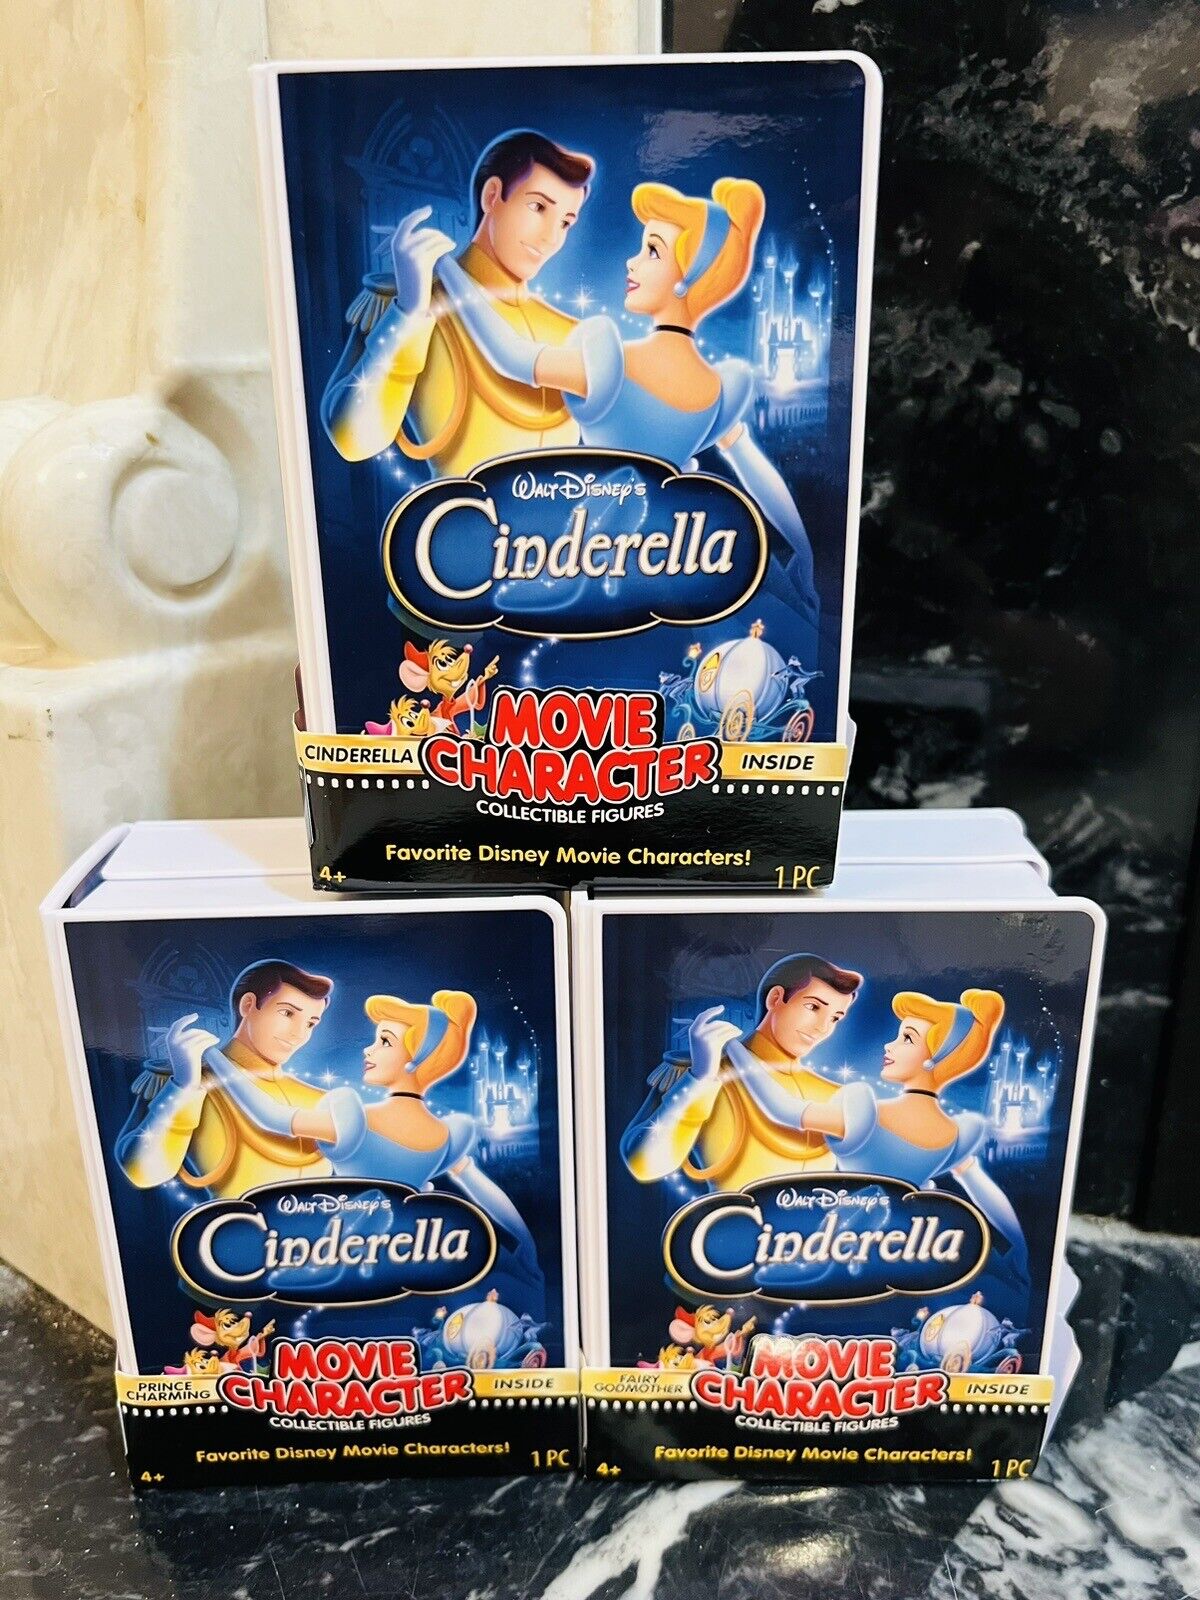 Disney’s 100th Anniversary- “3” VHS Boxes/ Figures from Cinderella